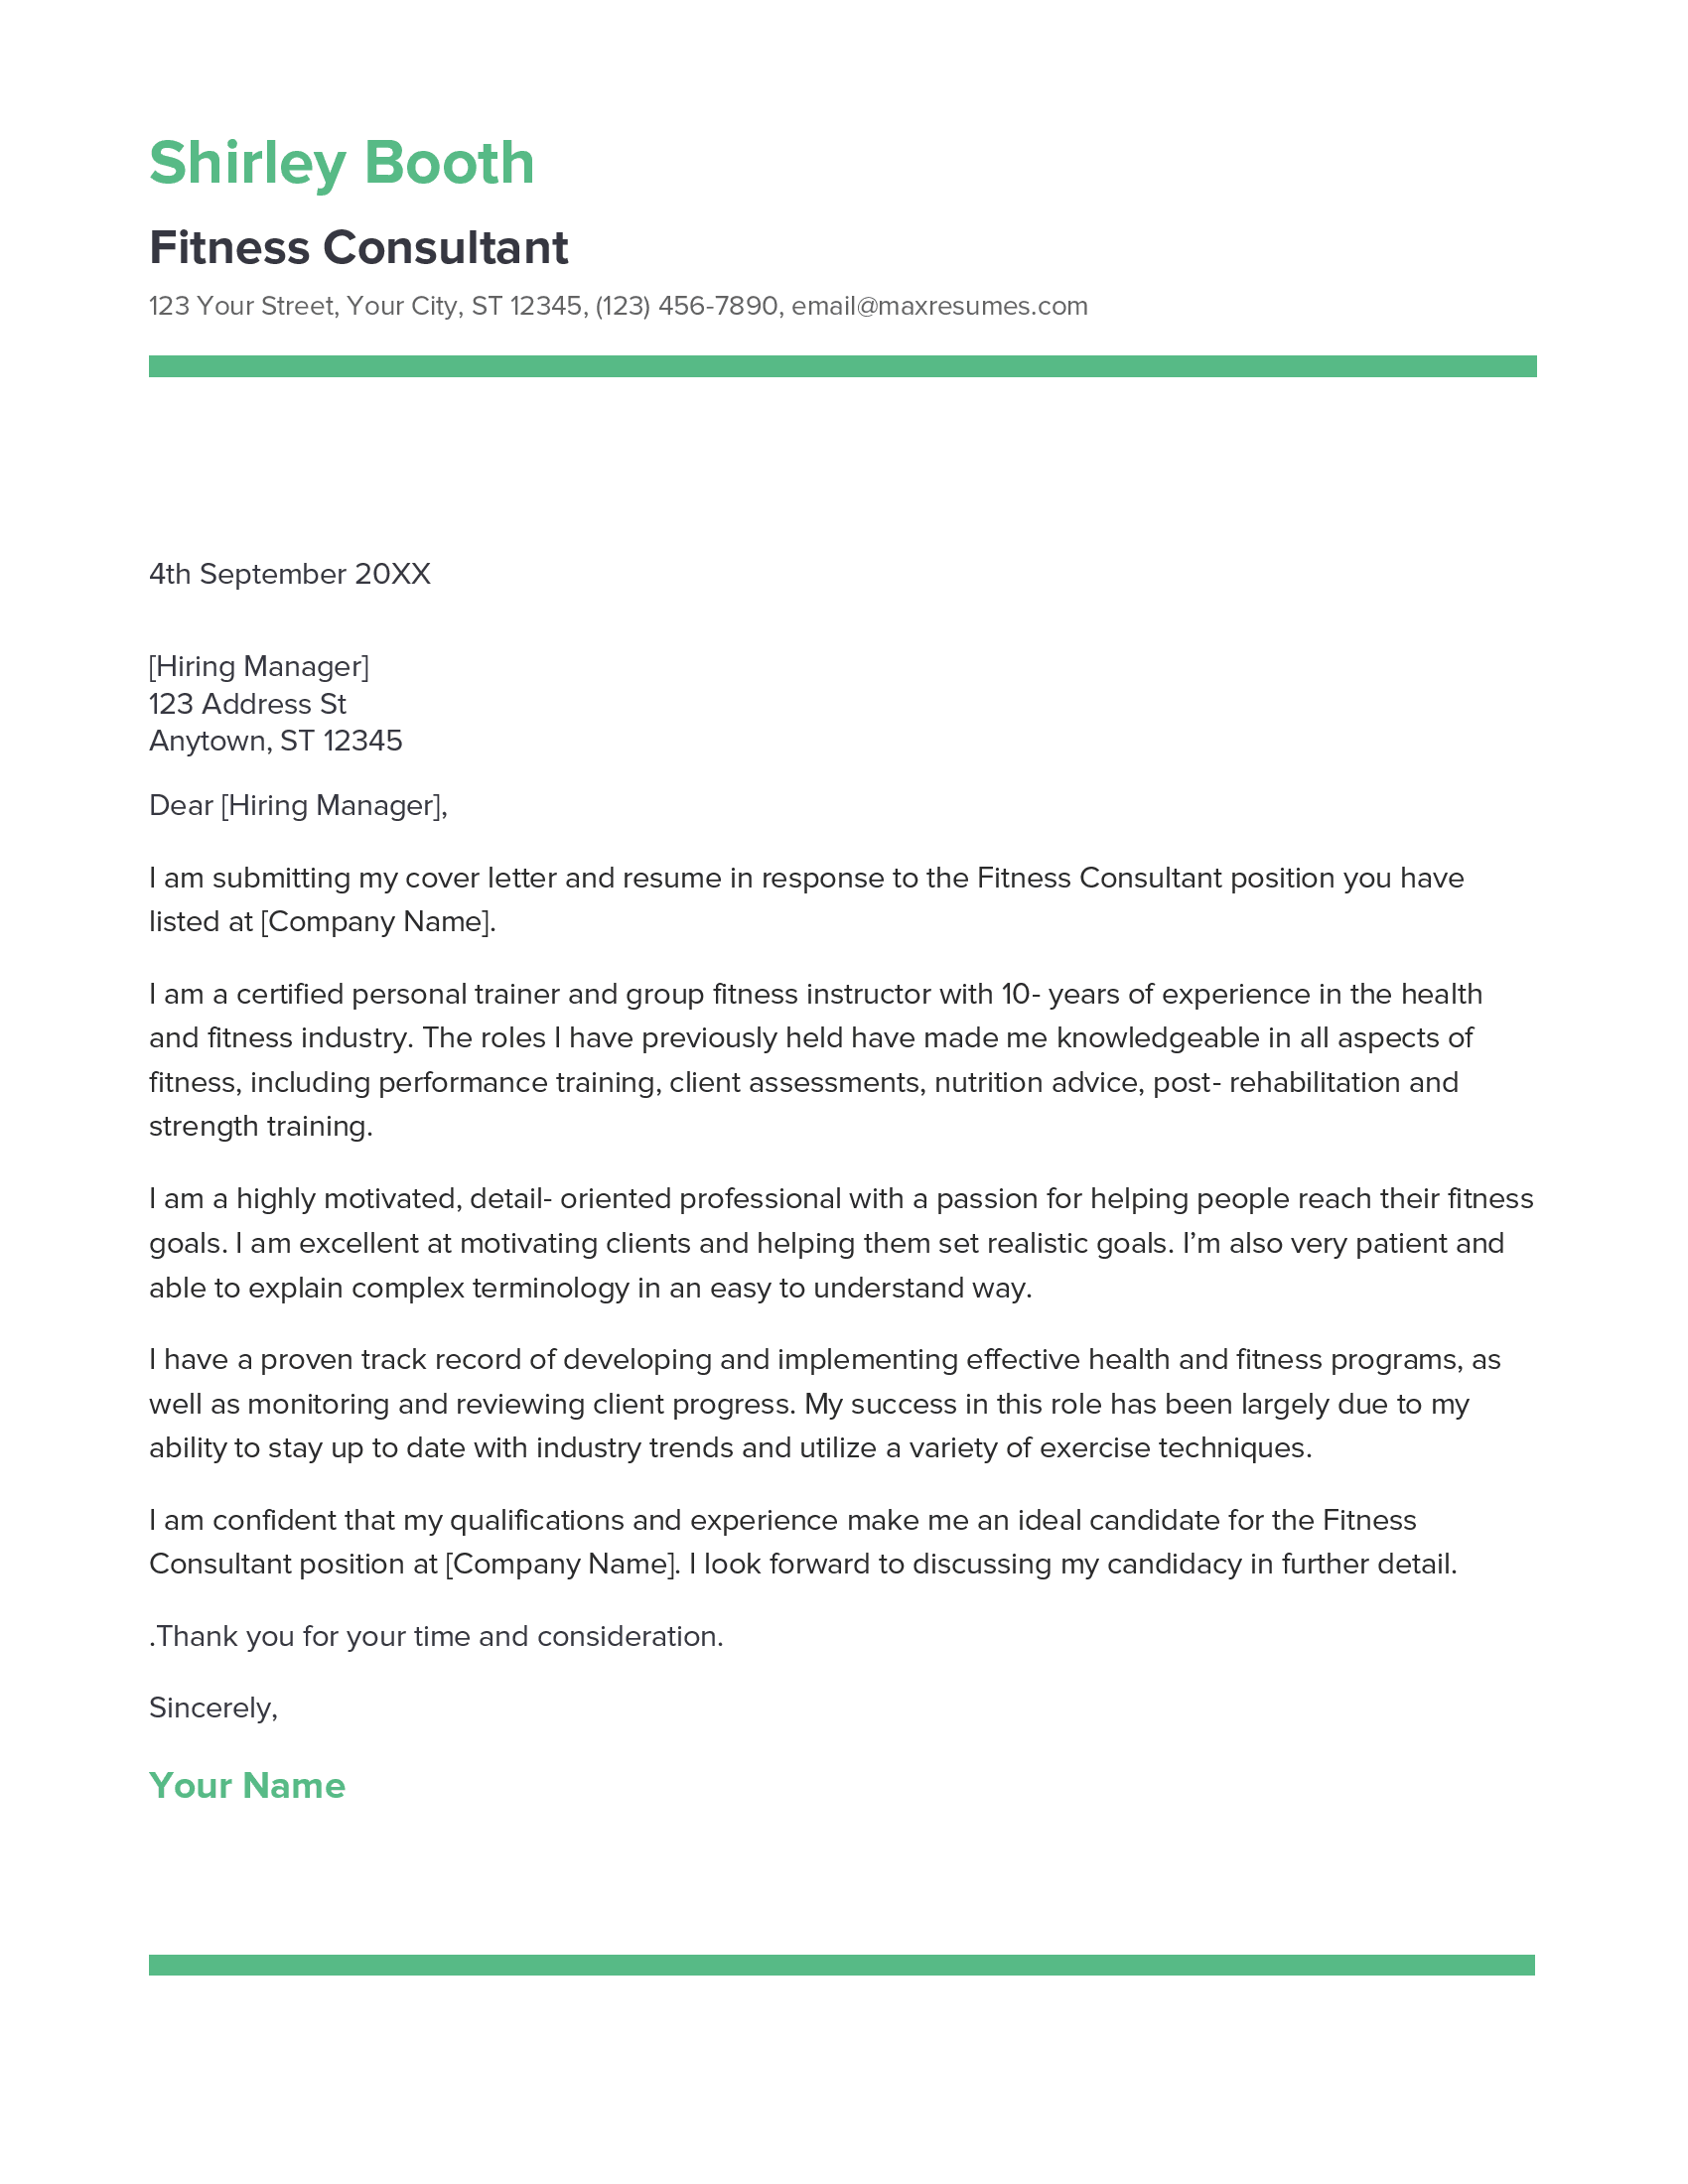 Fitness Consultant Cover Letter Example